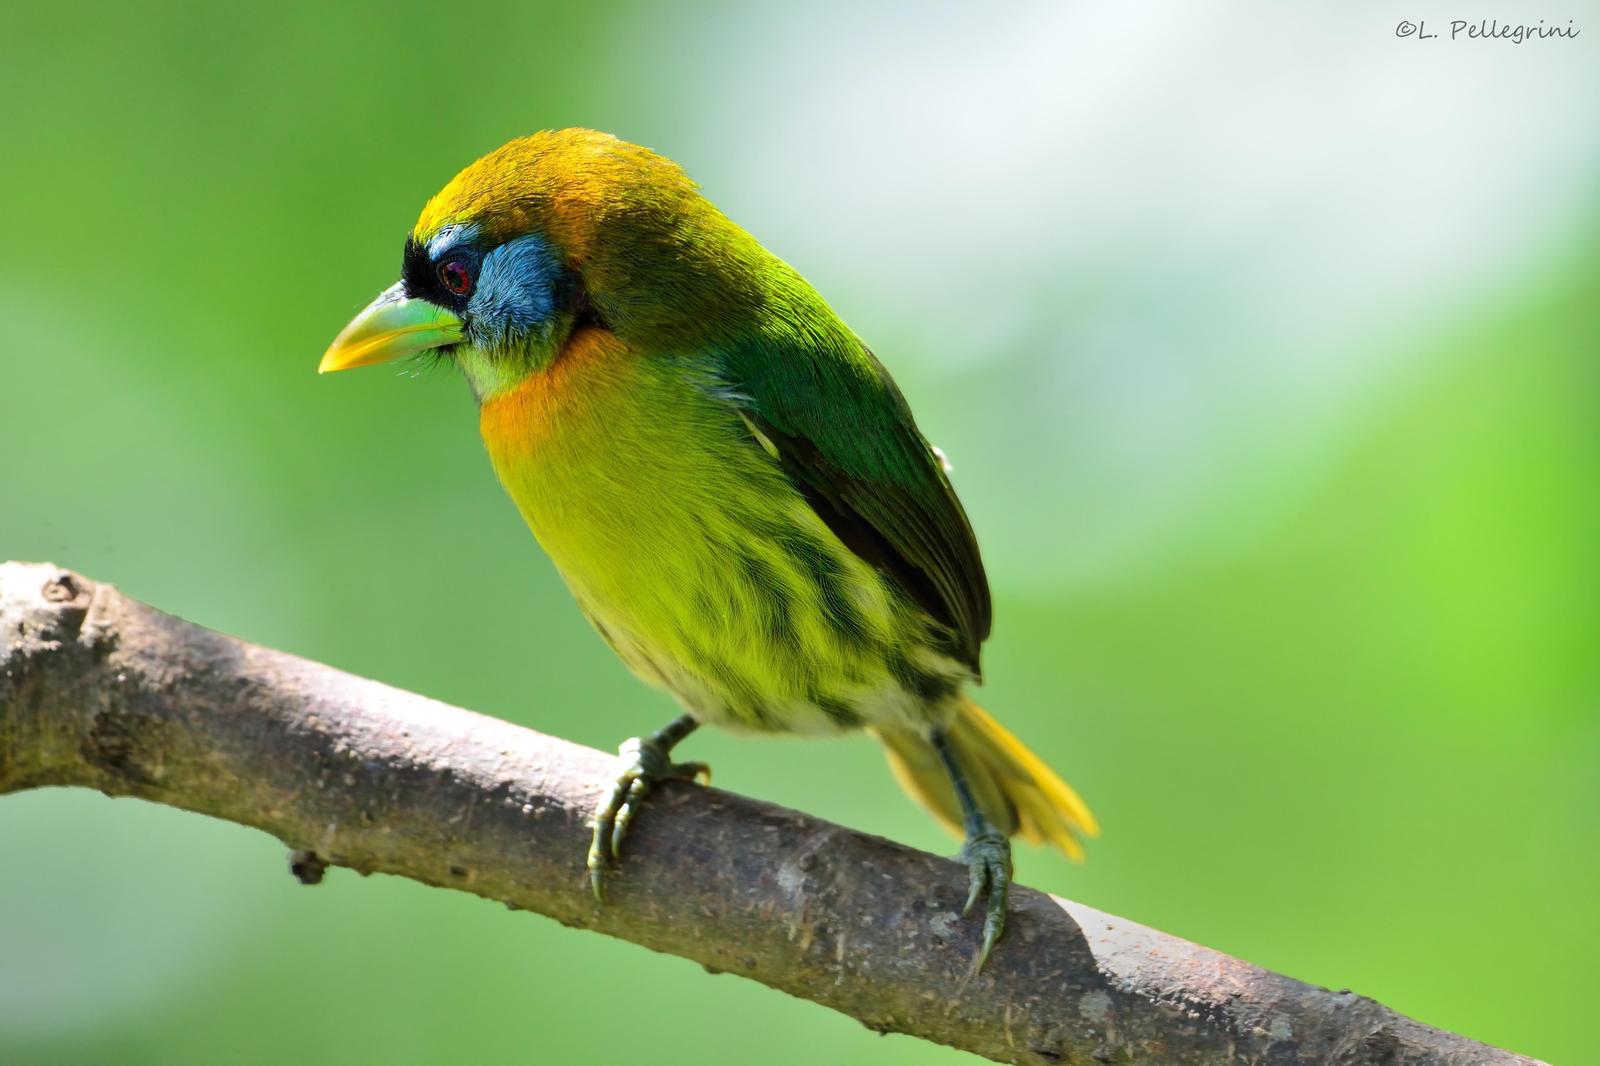 Red-headed Barbet Photo by Laurence Pellegrini